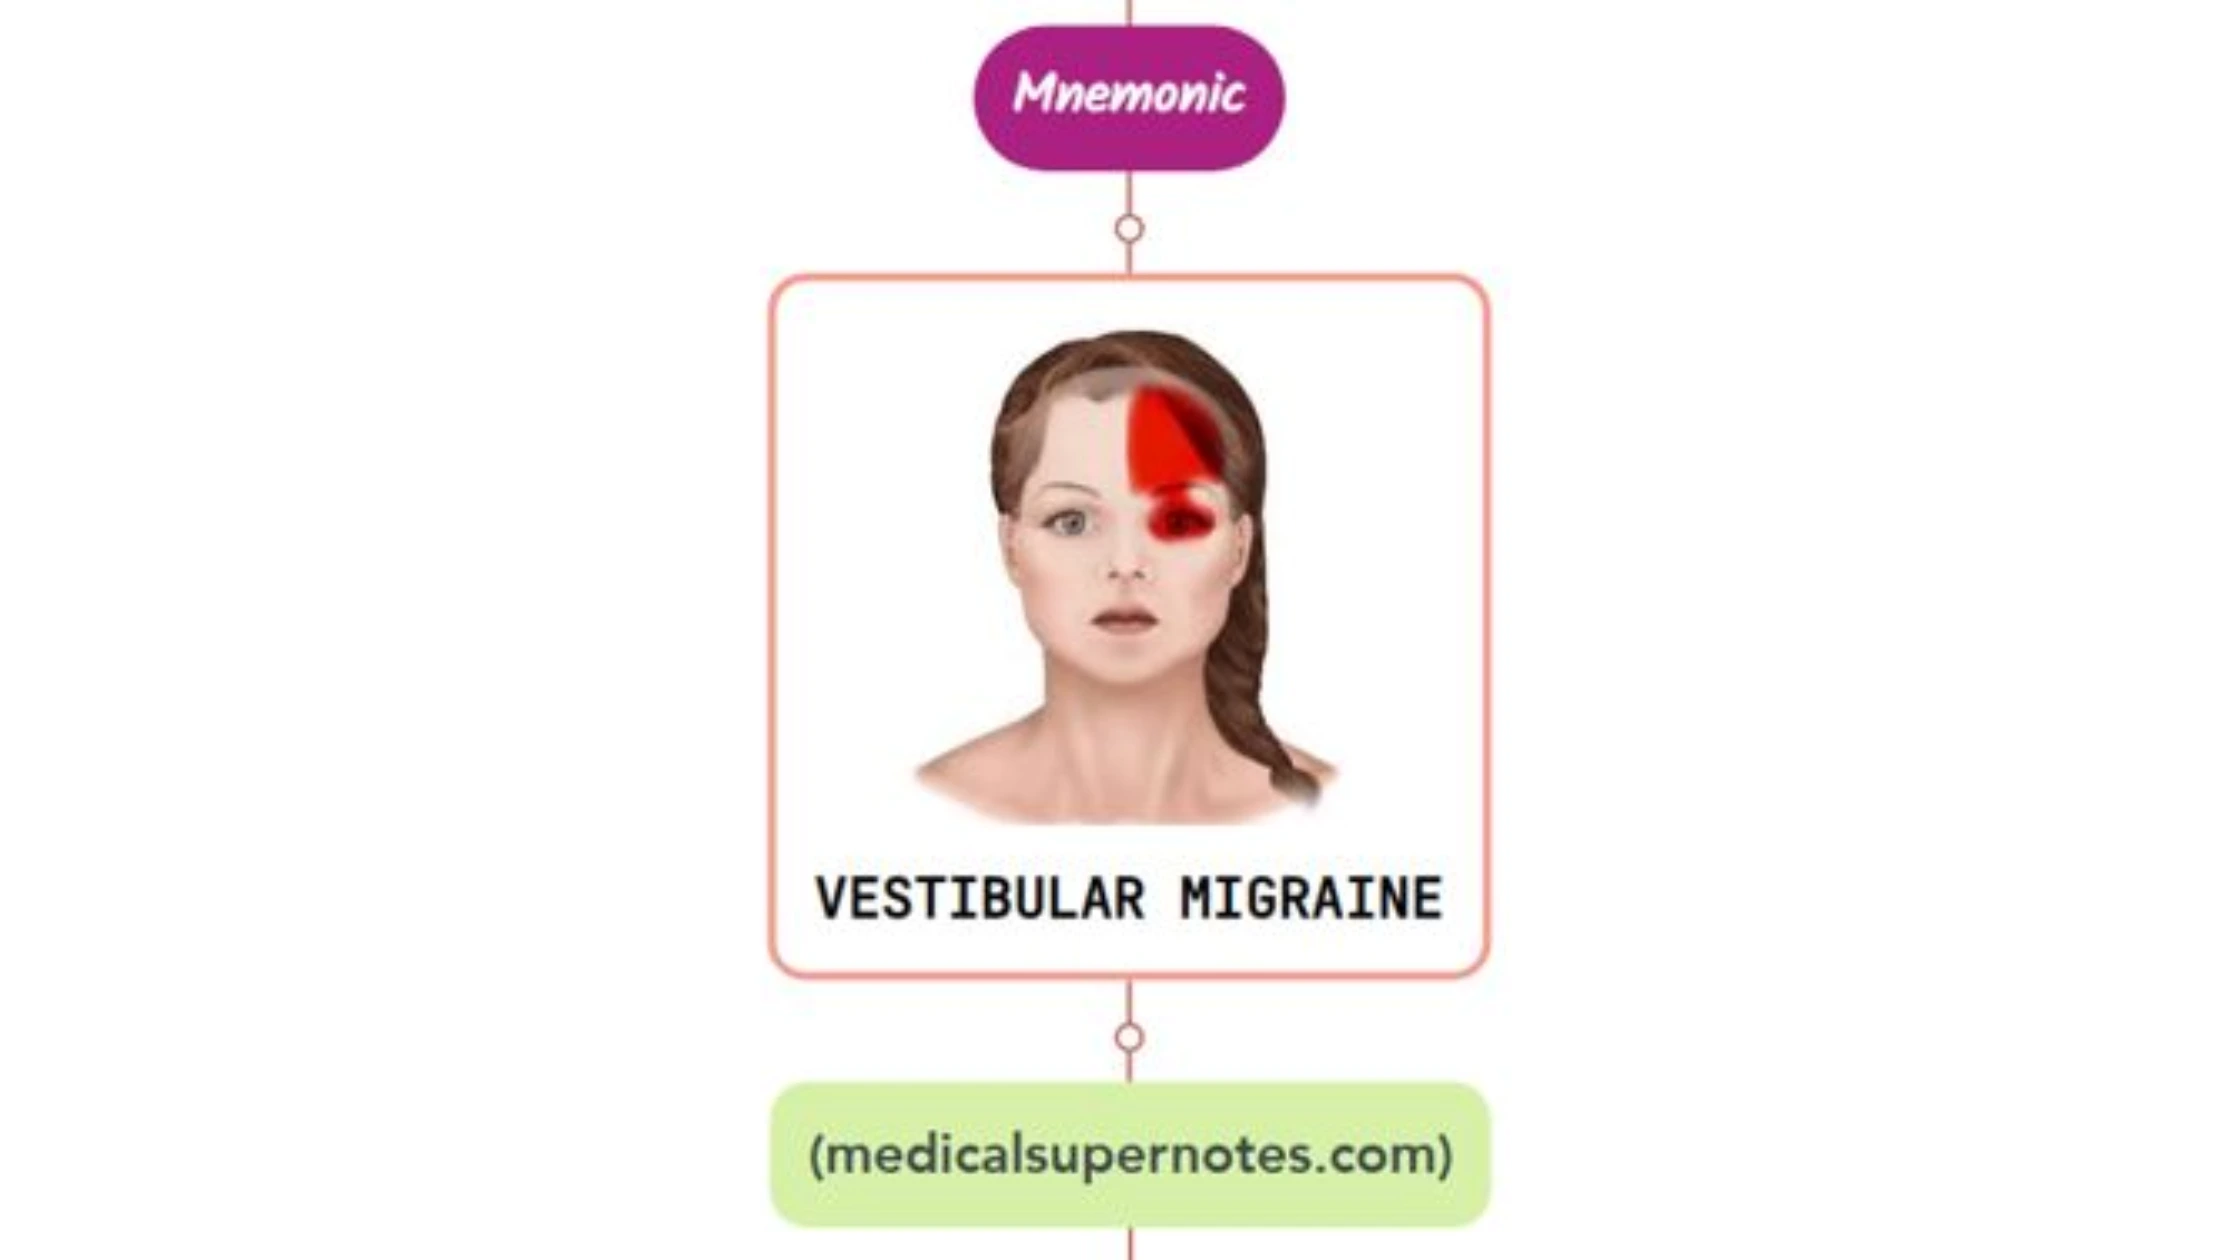 You are currently viewing Vestibular Migraine Mnemonic